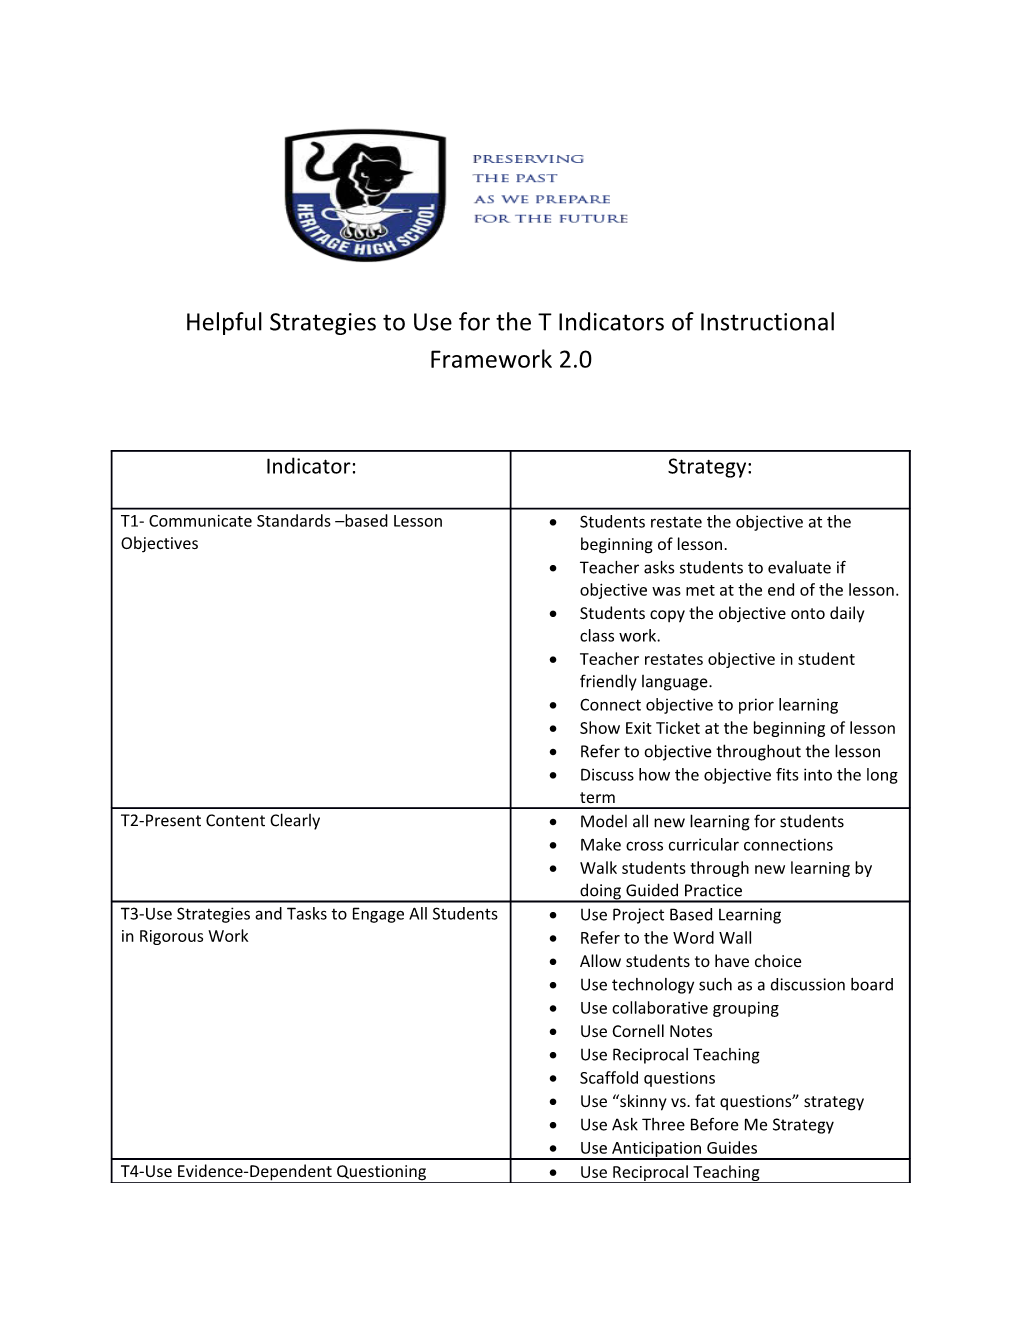 Helpful Strategies to Use for the T Indicators of Instructional Framework 2.0